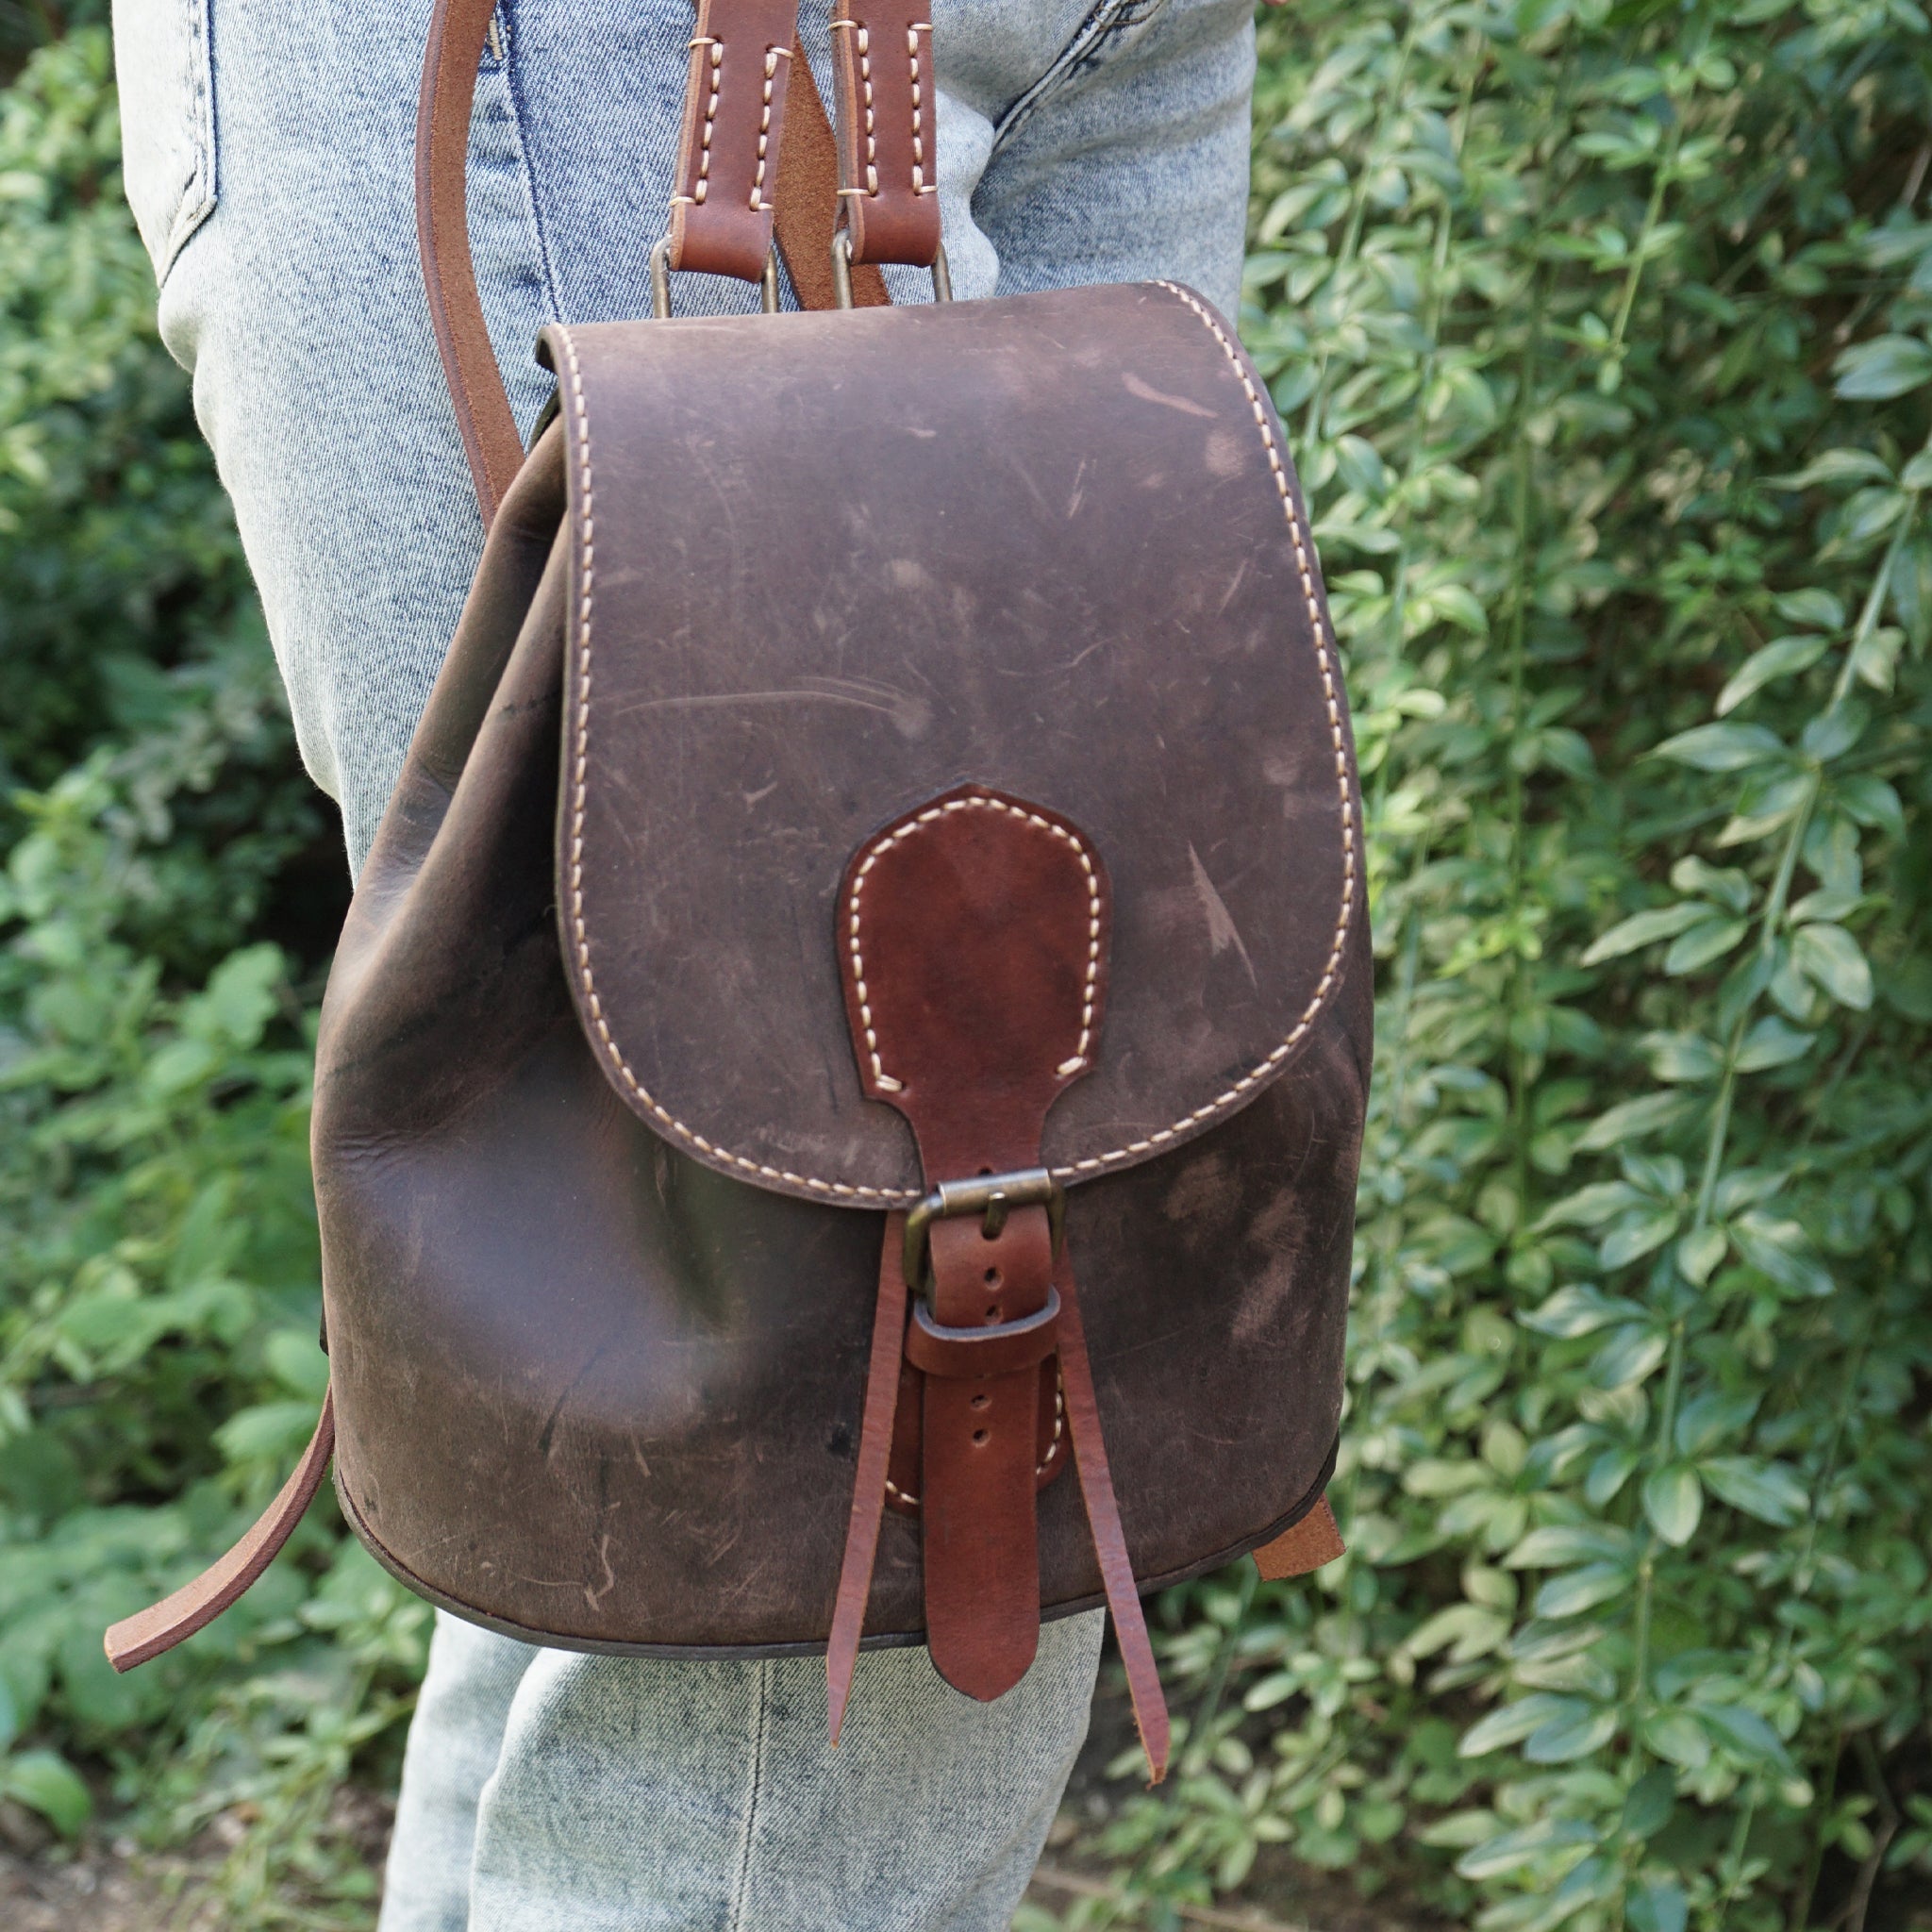 FREE New Flap Pattern for Dale Backpack - Vasile and Pavel Leather Patterns